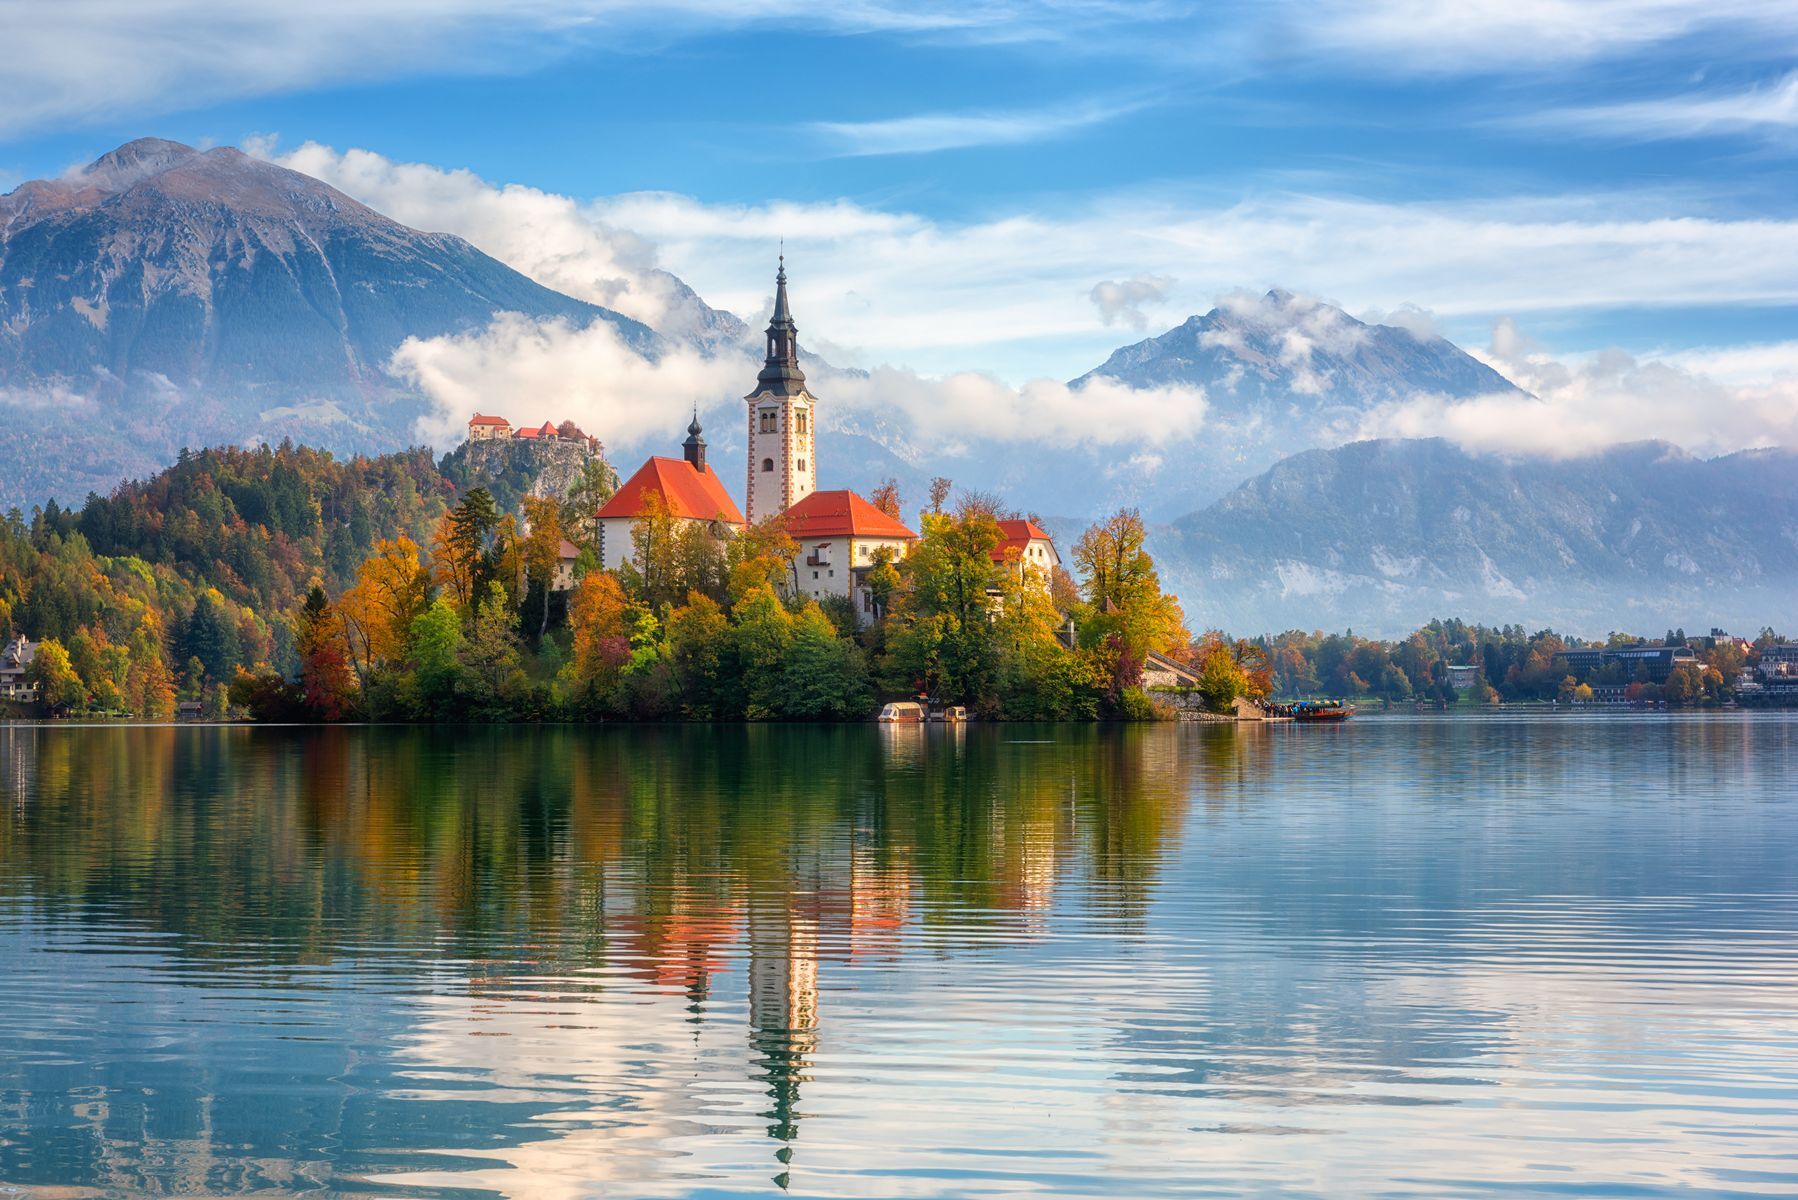 <p>Brimming with breathtaking natural spaces, picturesque medieval towns and top-notch vineyards, Slovenia is a destination that deserves to be better known. Discover the wonders of this verdant land by reading our list of the 20 most fascinating places to visit in Slovenia.</p>